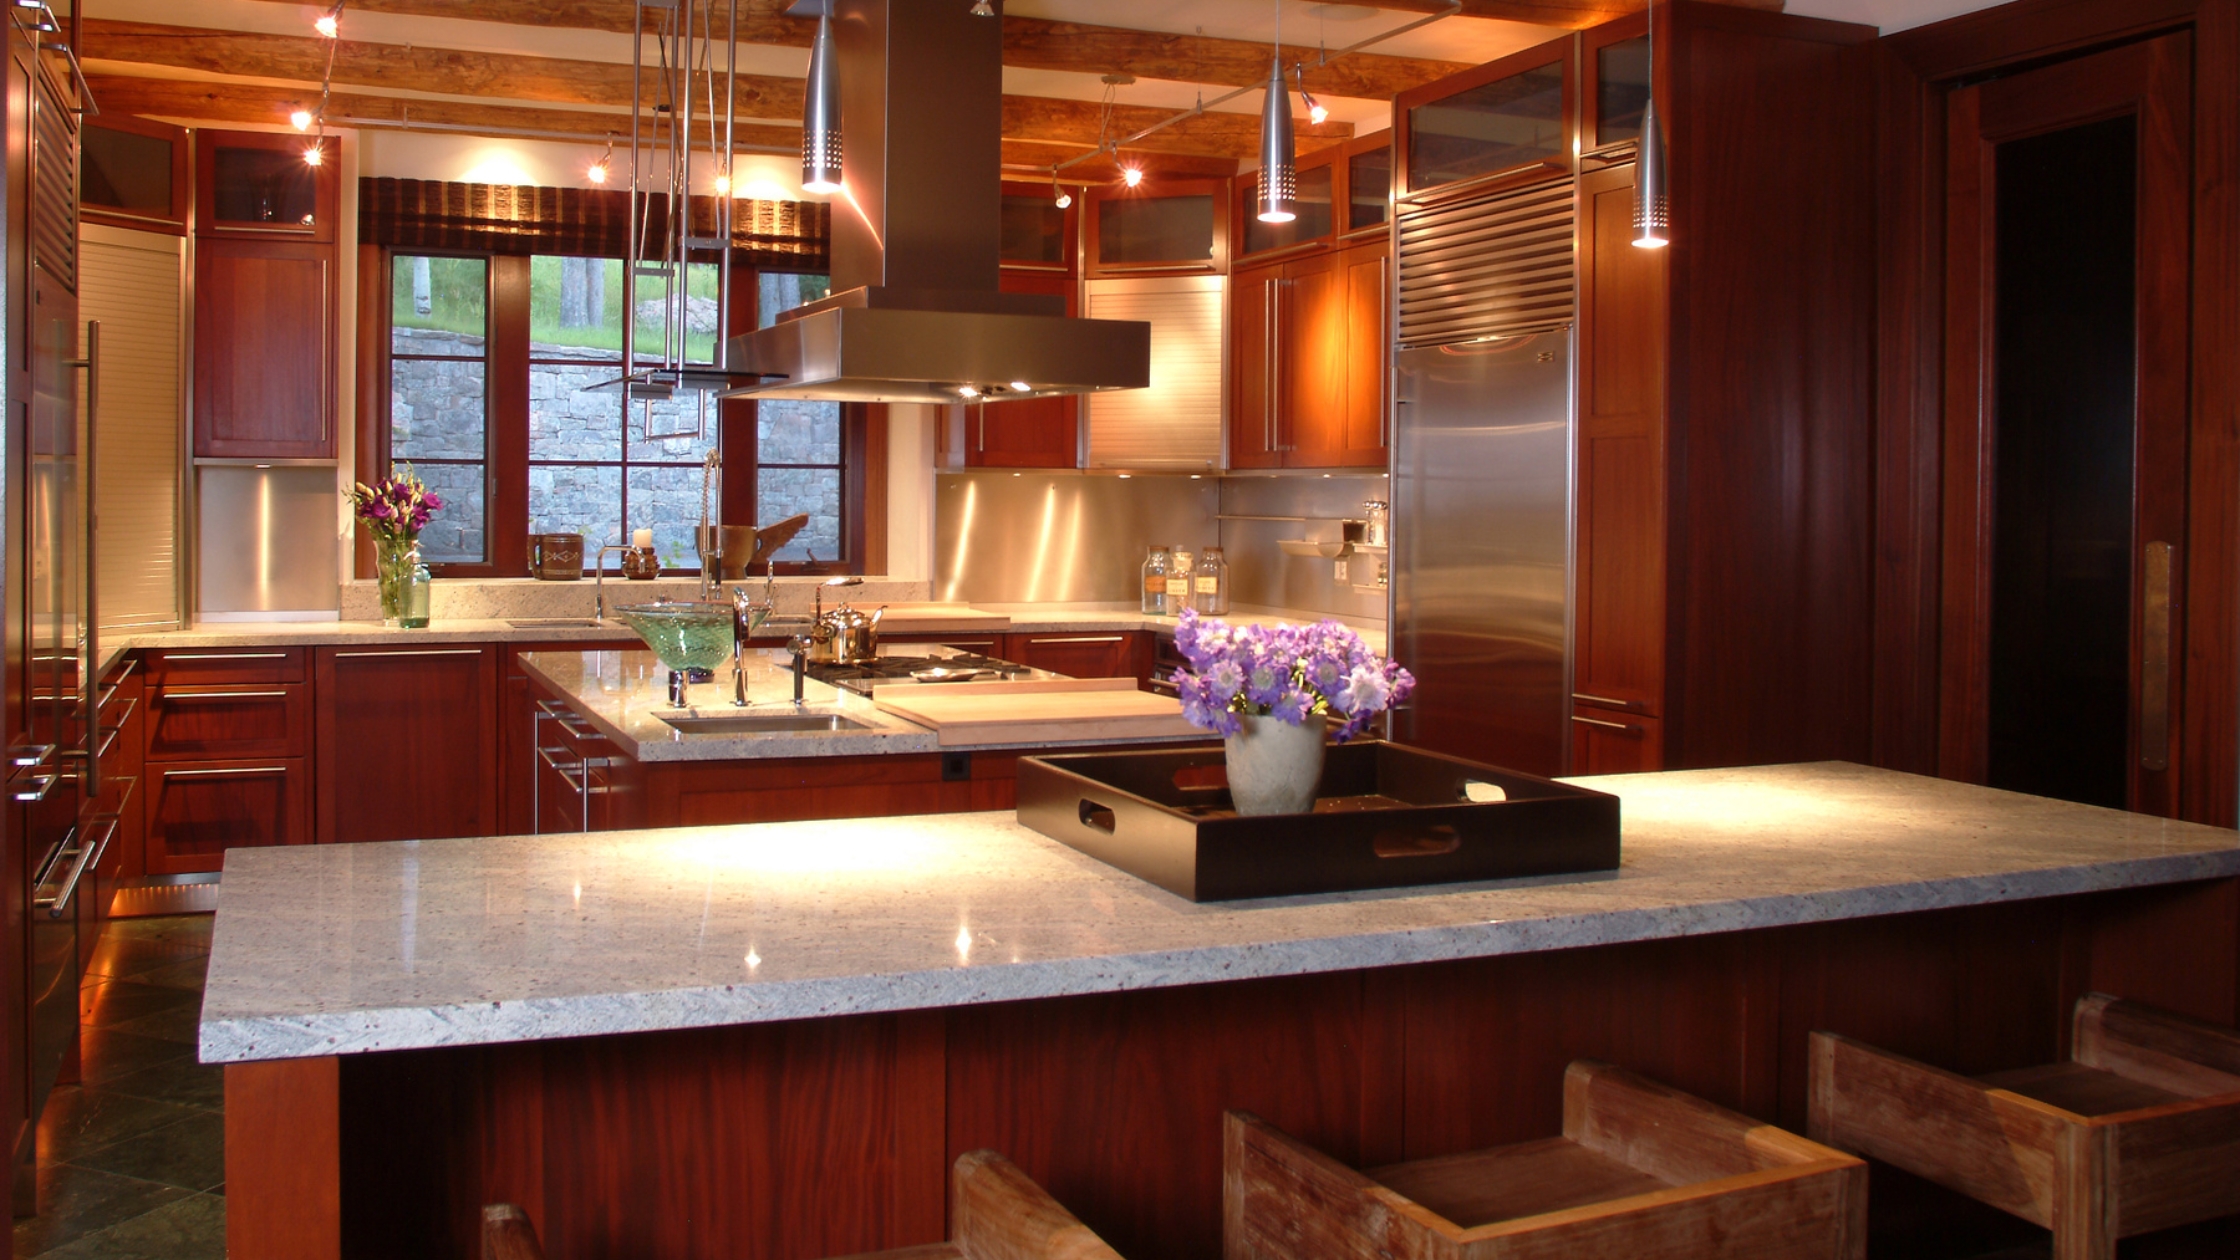 15+ Functional and Gorgeous Kitchen Design Ideas